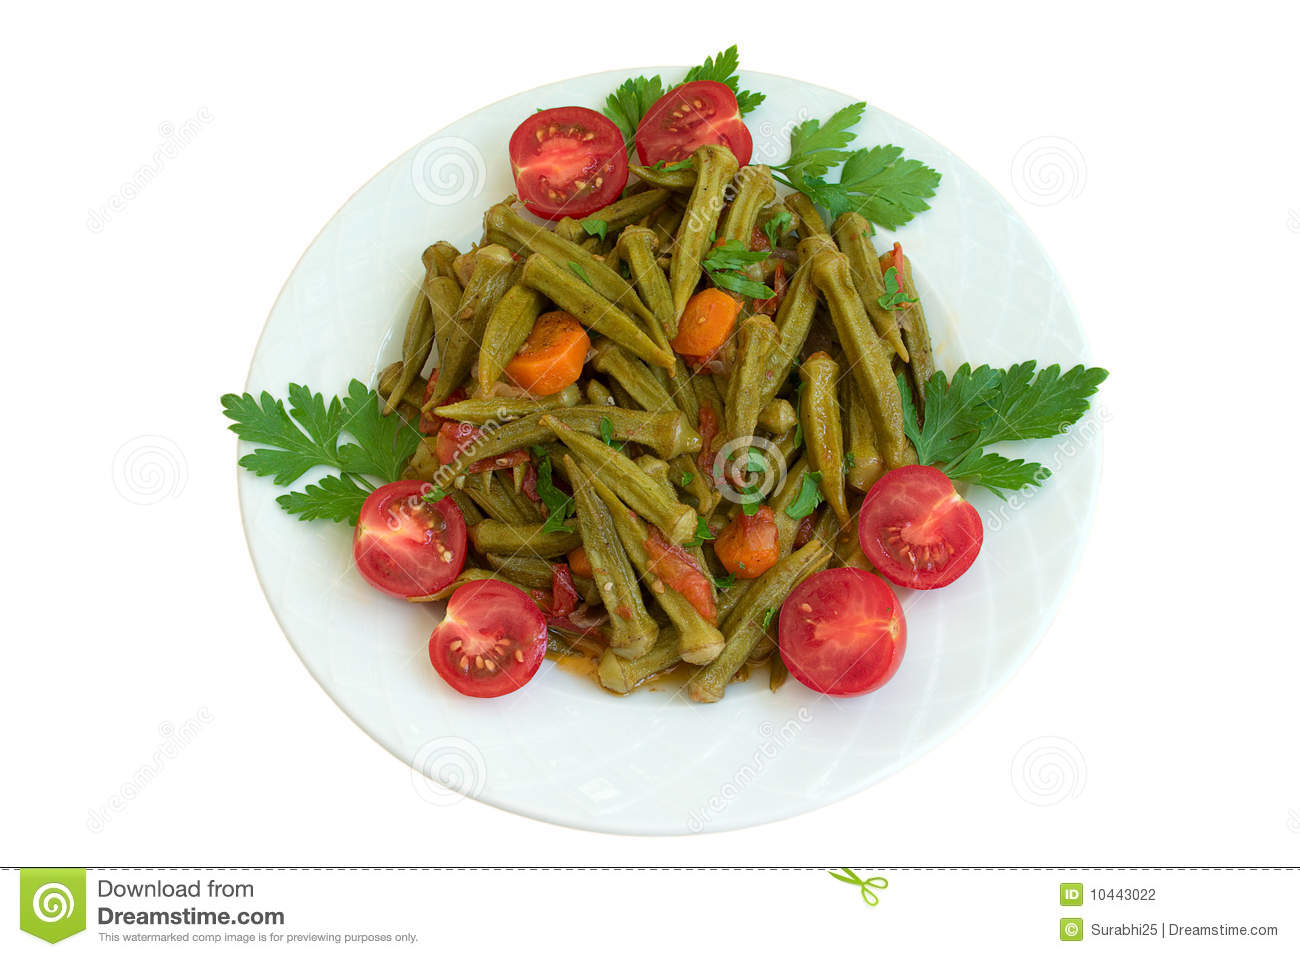 Okra With Tomatoes Carrot And Parsley On Plate Isolated On White